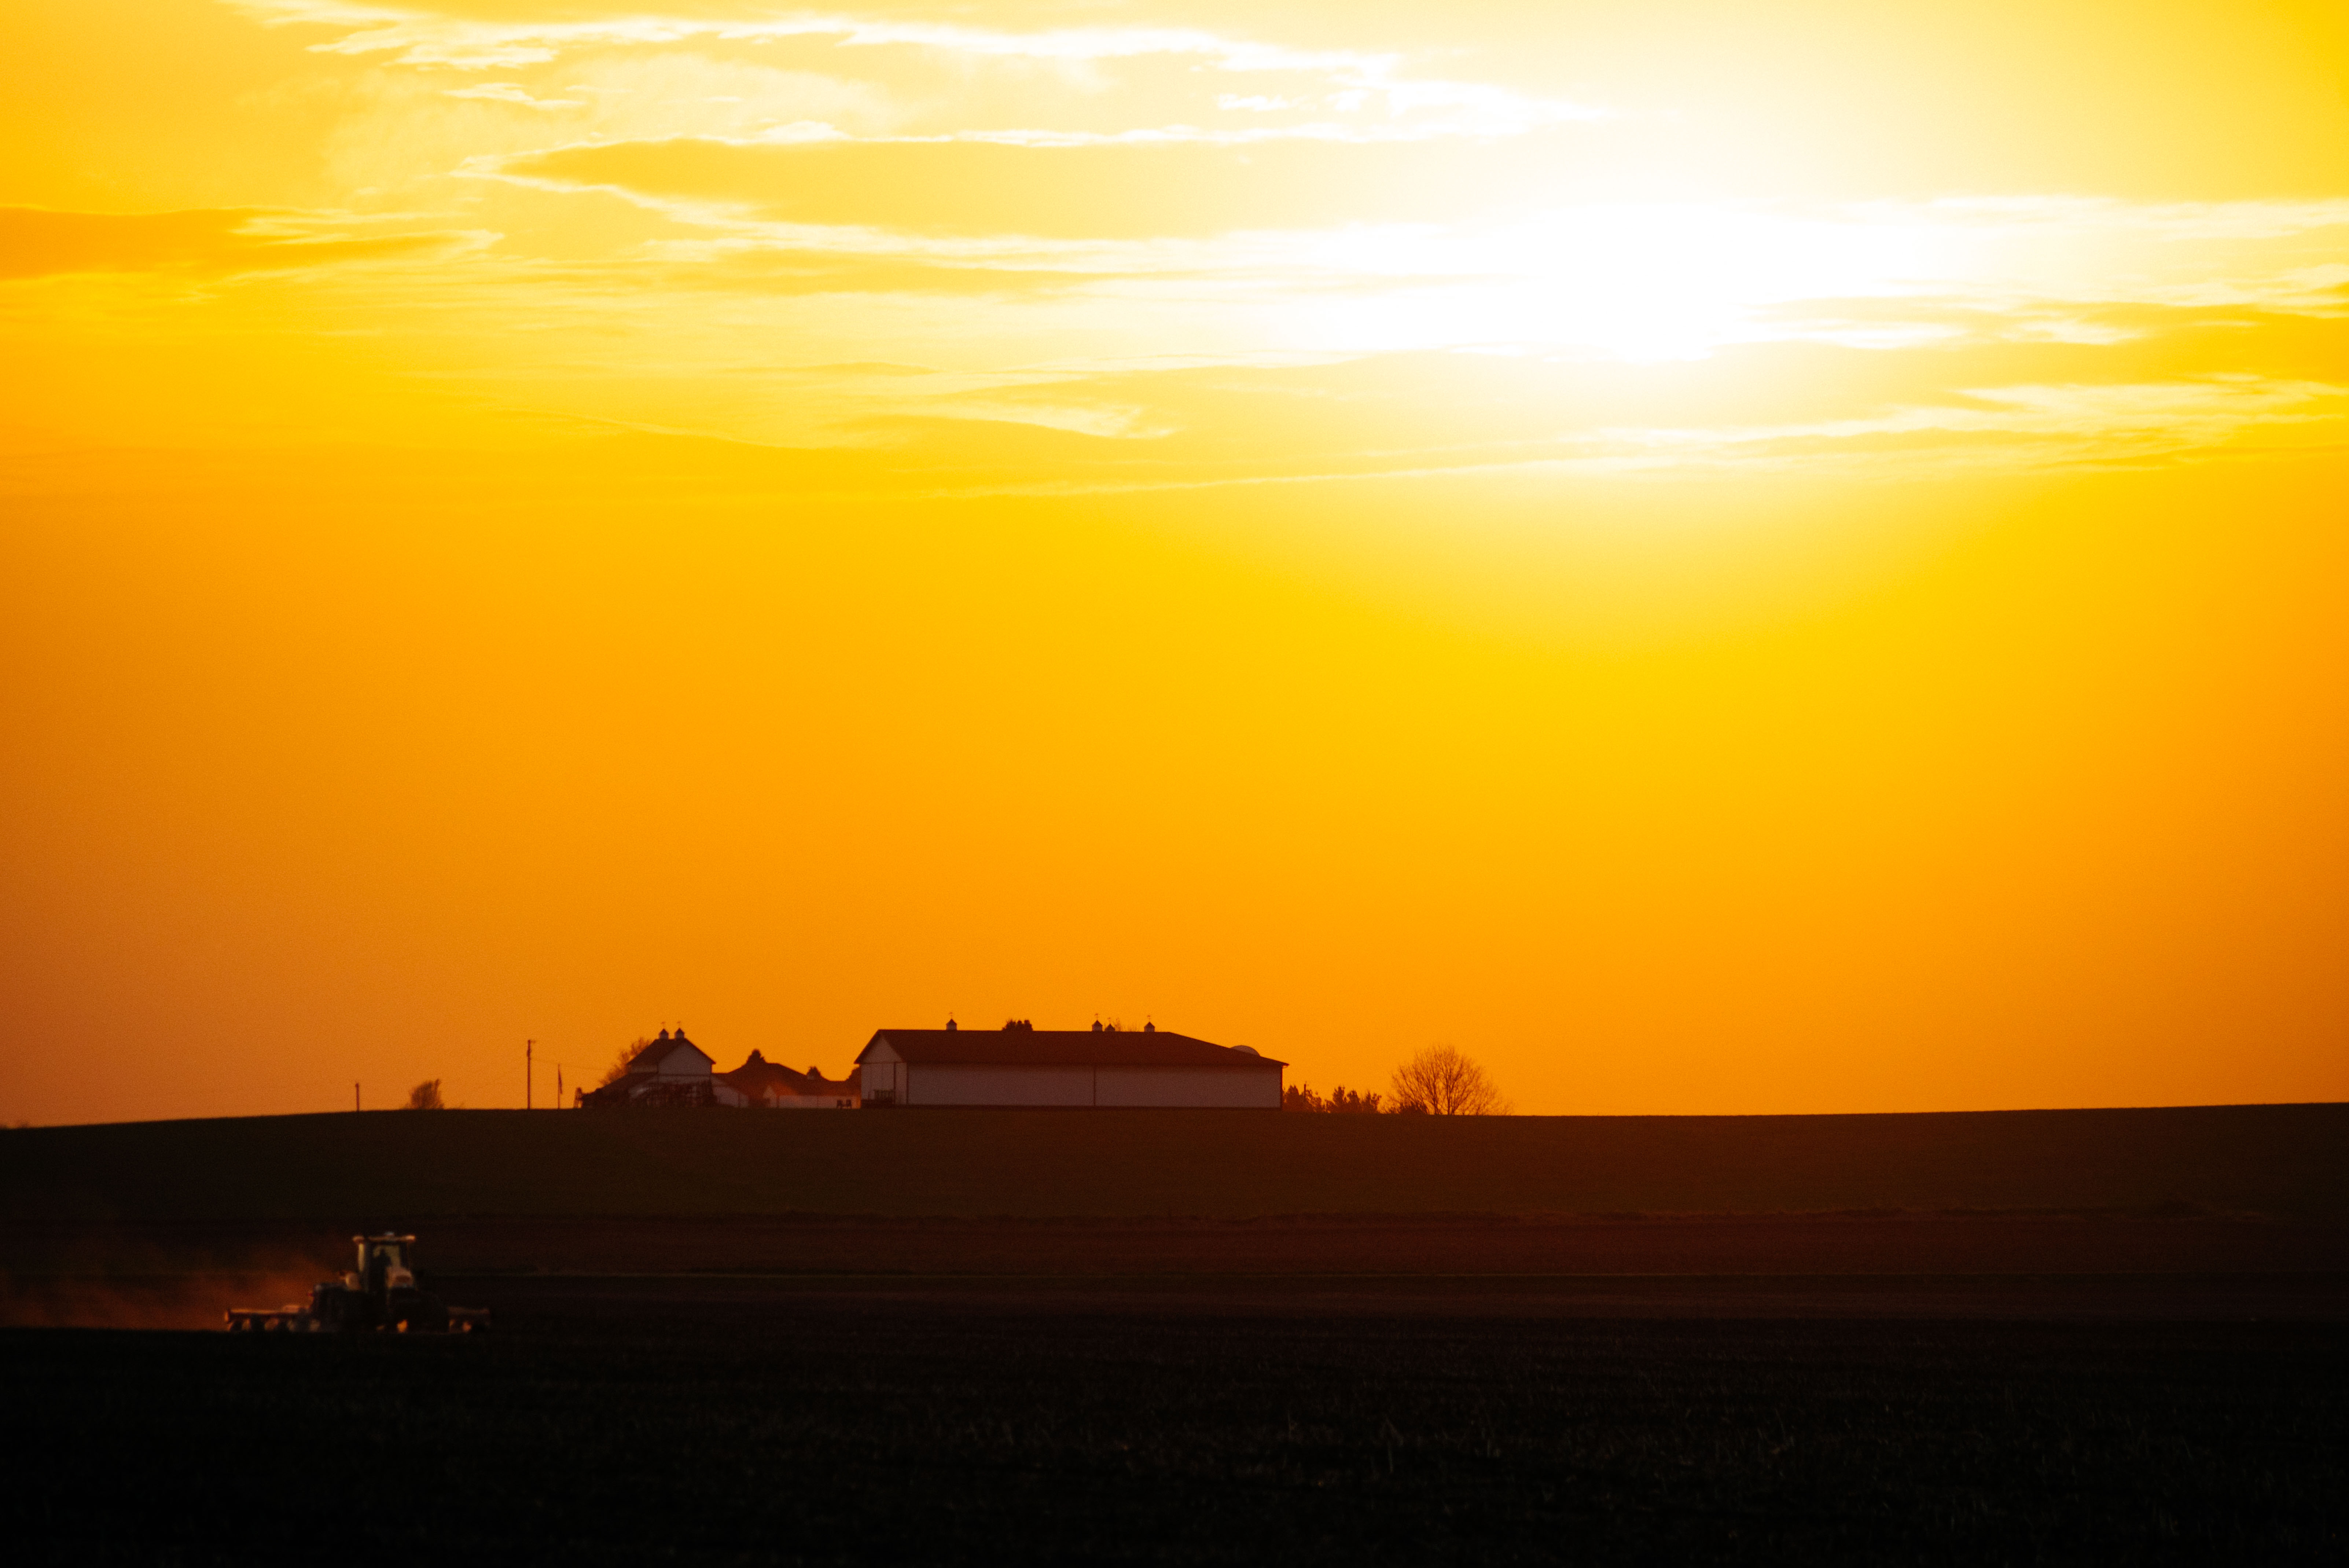 A tractor plants in a field north of Marshalltown, Iowa